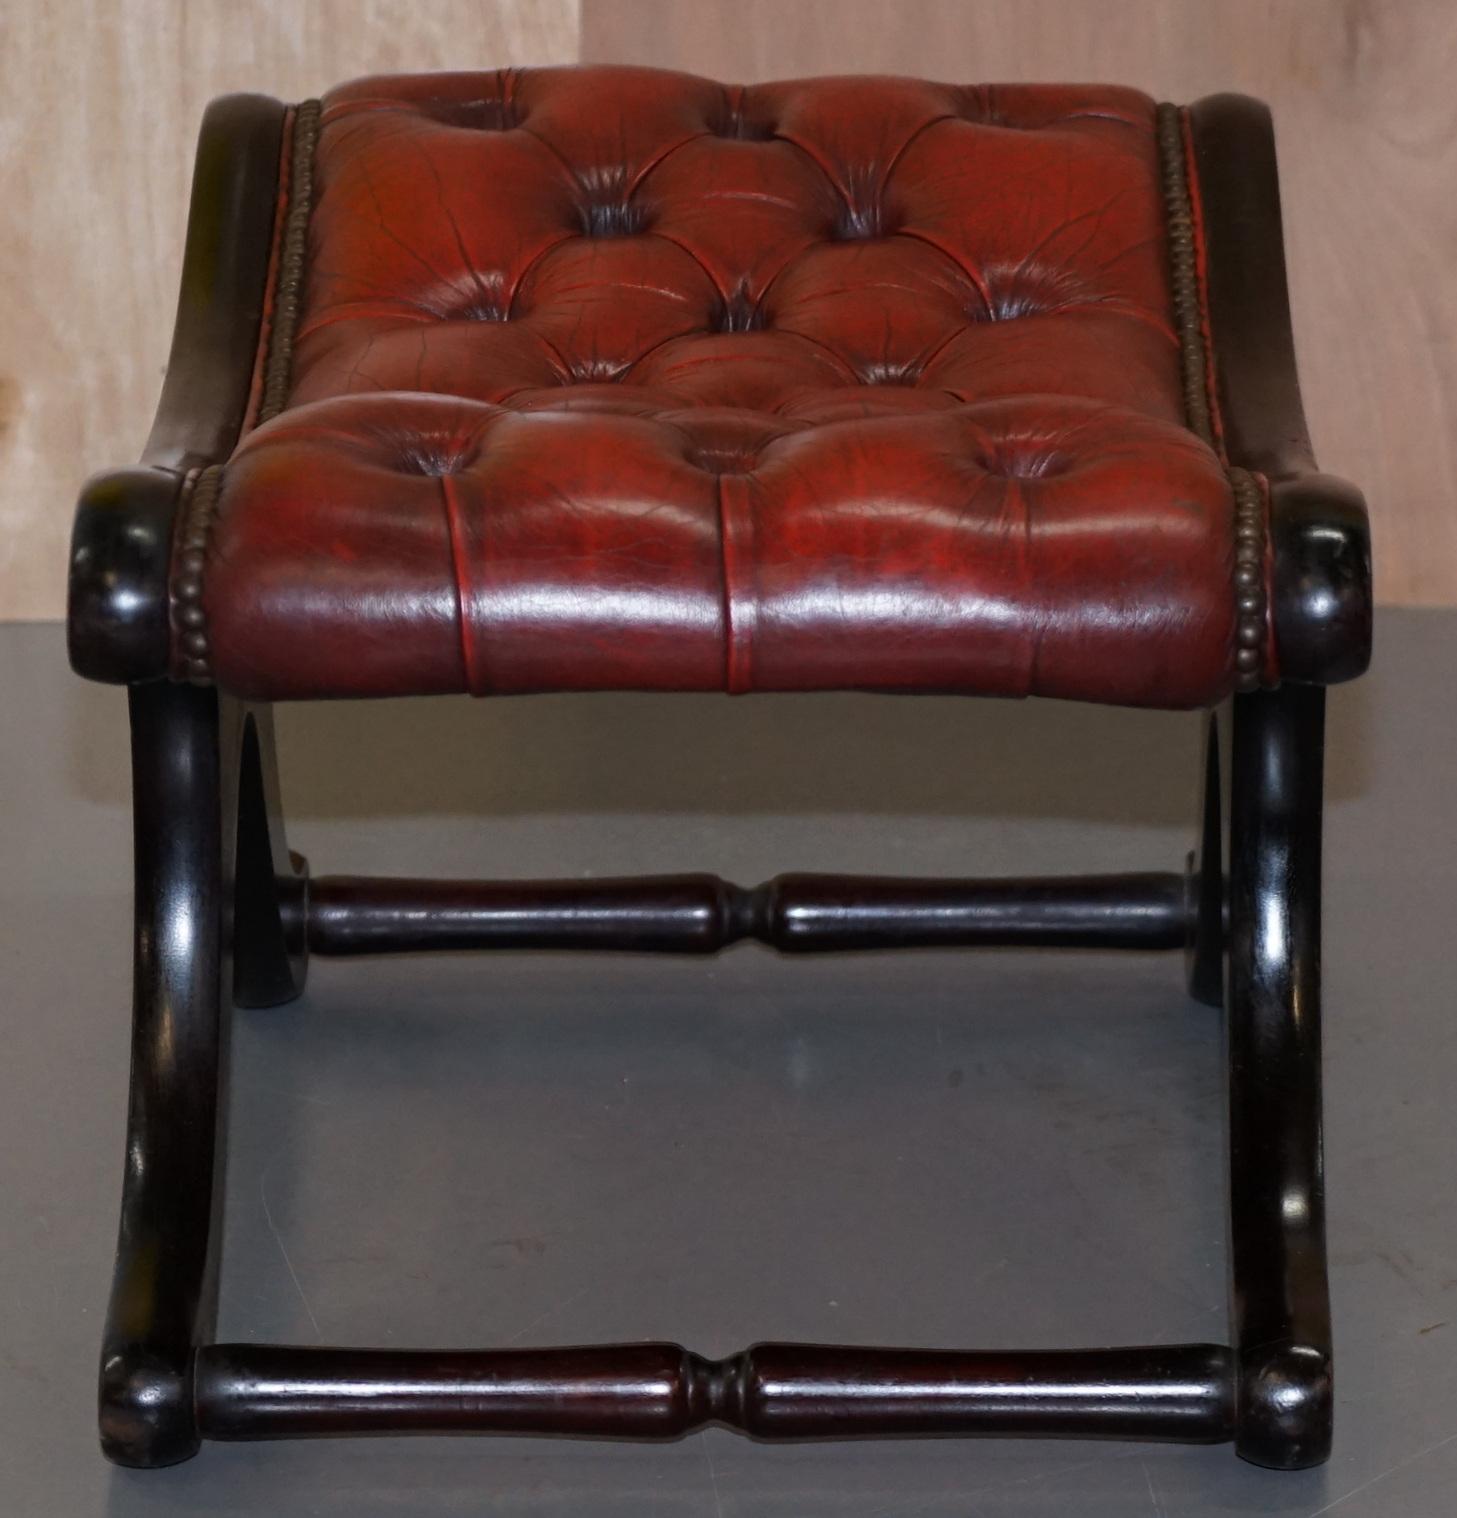 20th Century Lovely Chesterfield Oxblood Leather & Mahogany Curved Footstool Footrest Stool